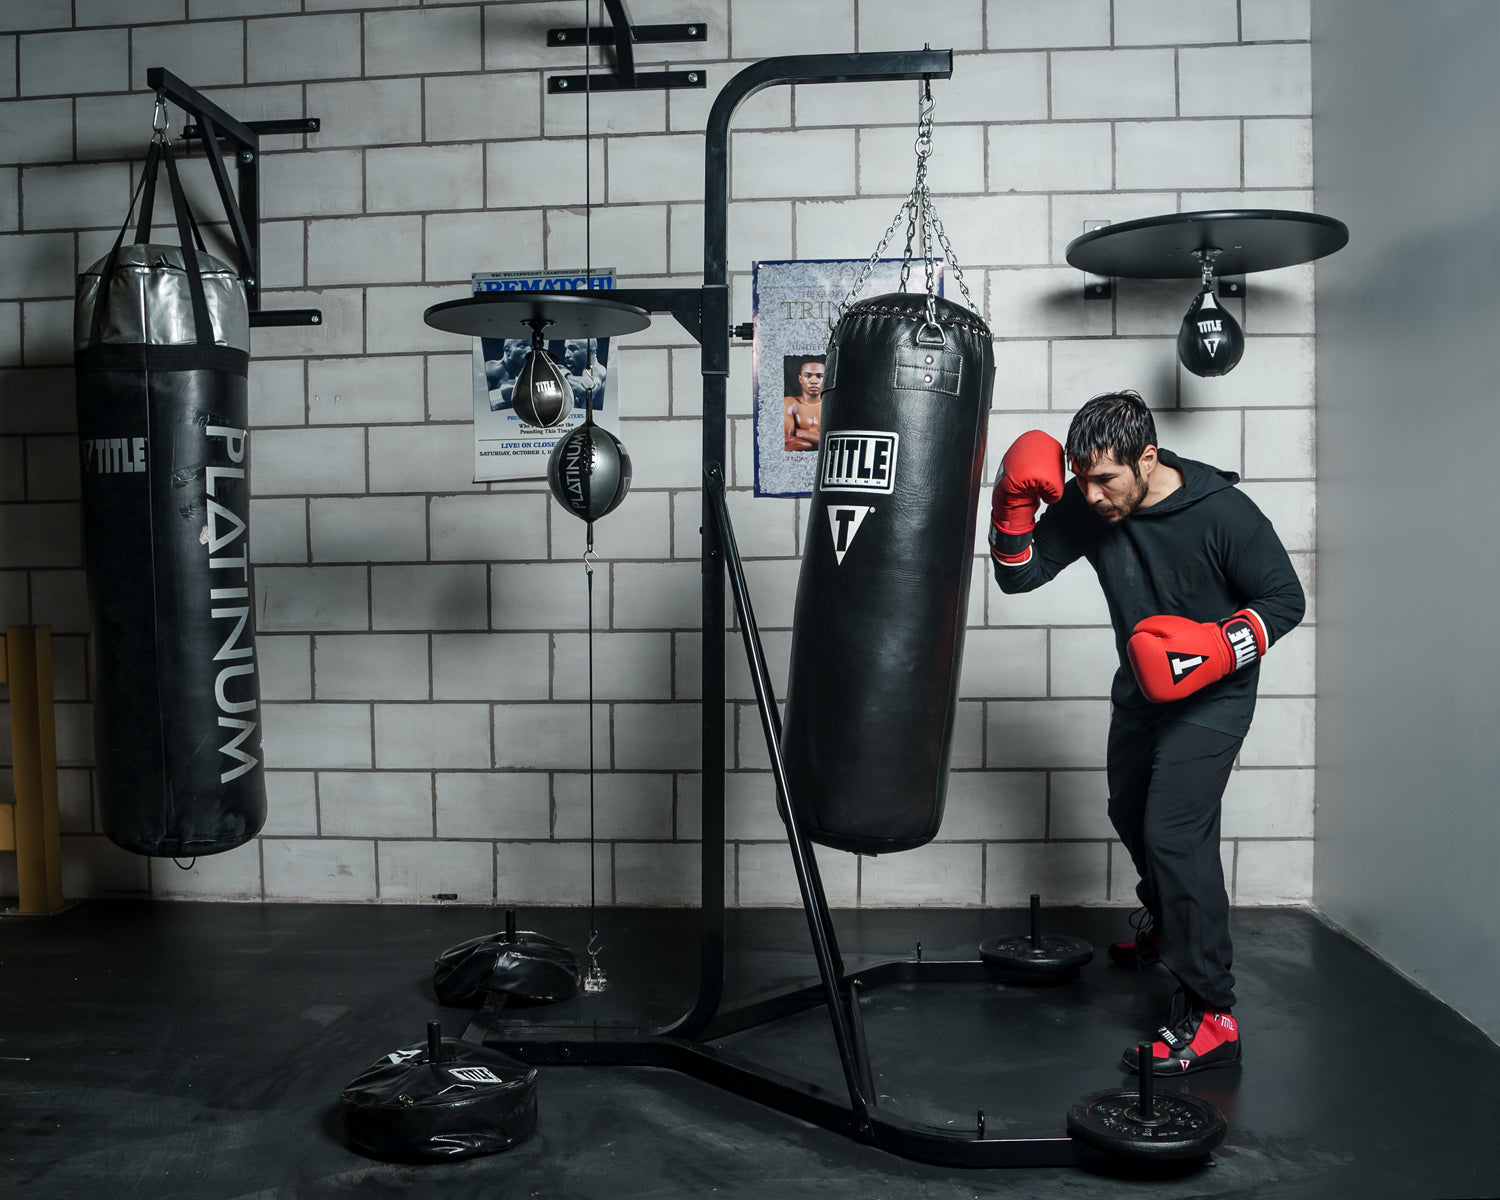 punching bag and speed bag stand